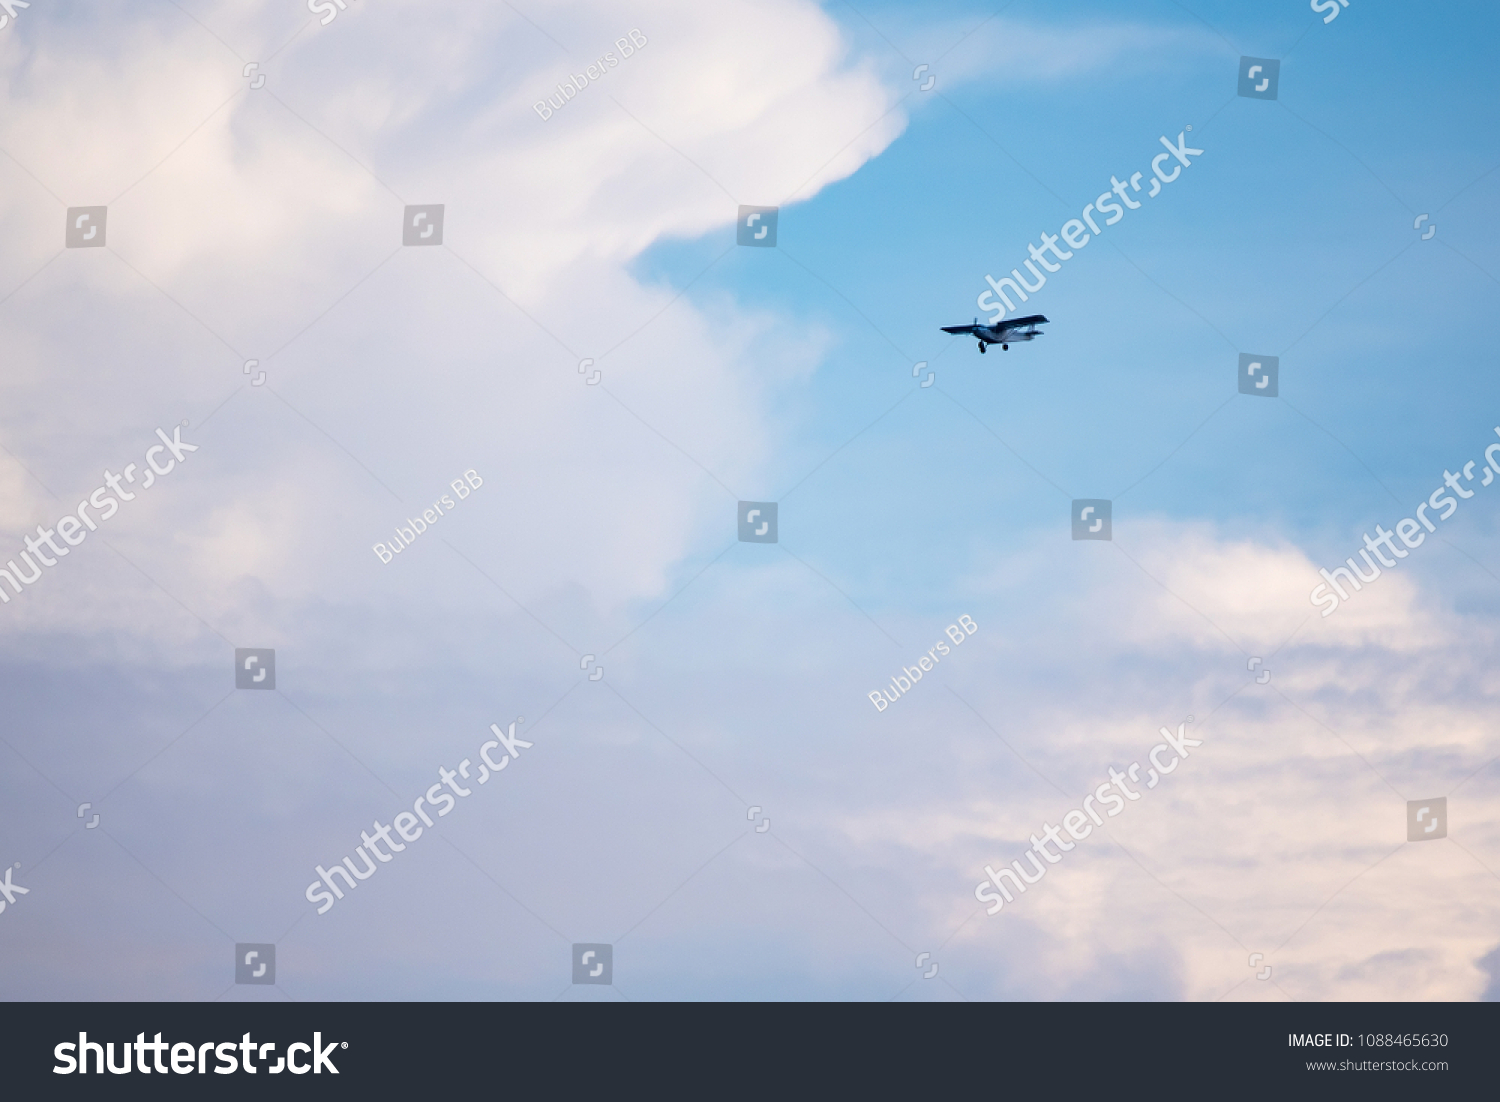 Small plane in the air. Blue sky with white clouds #1088465630